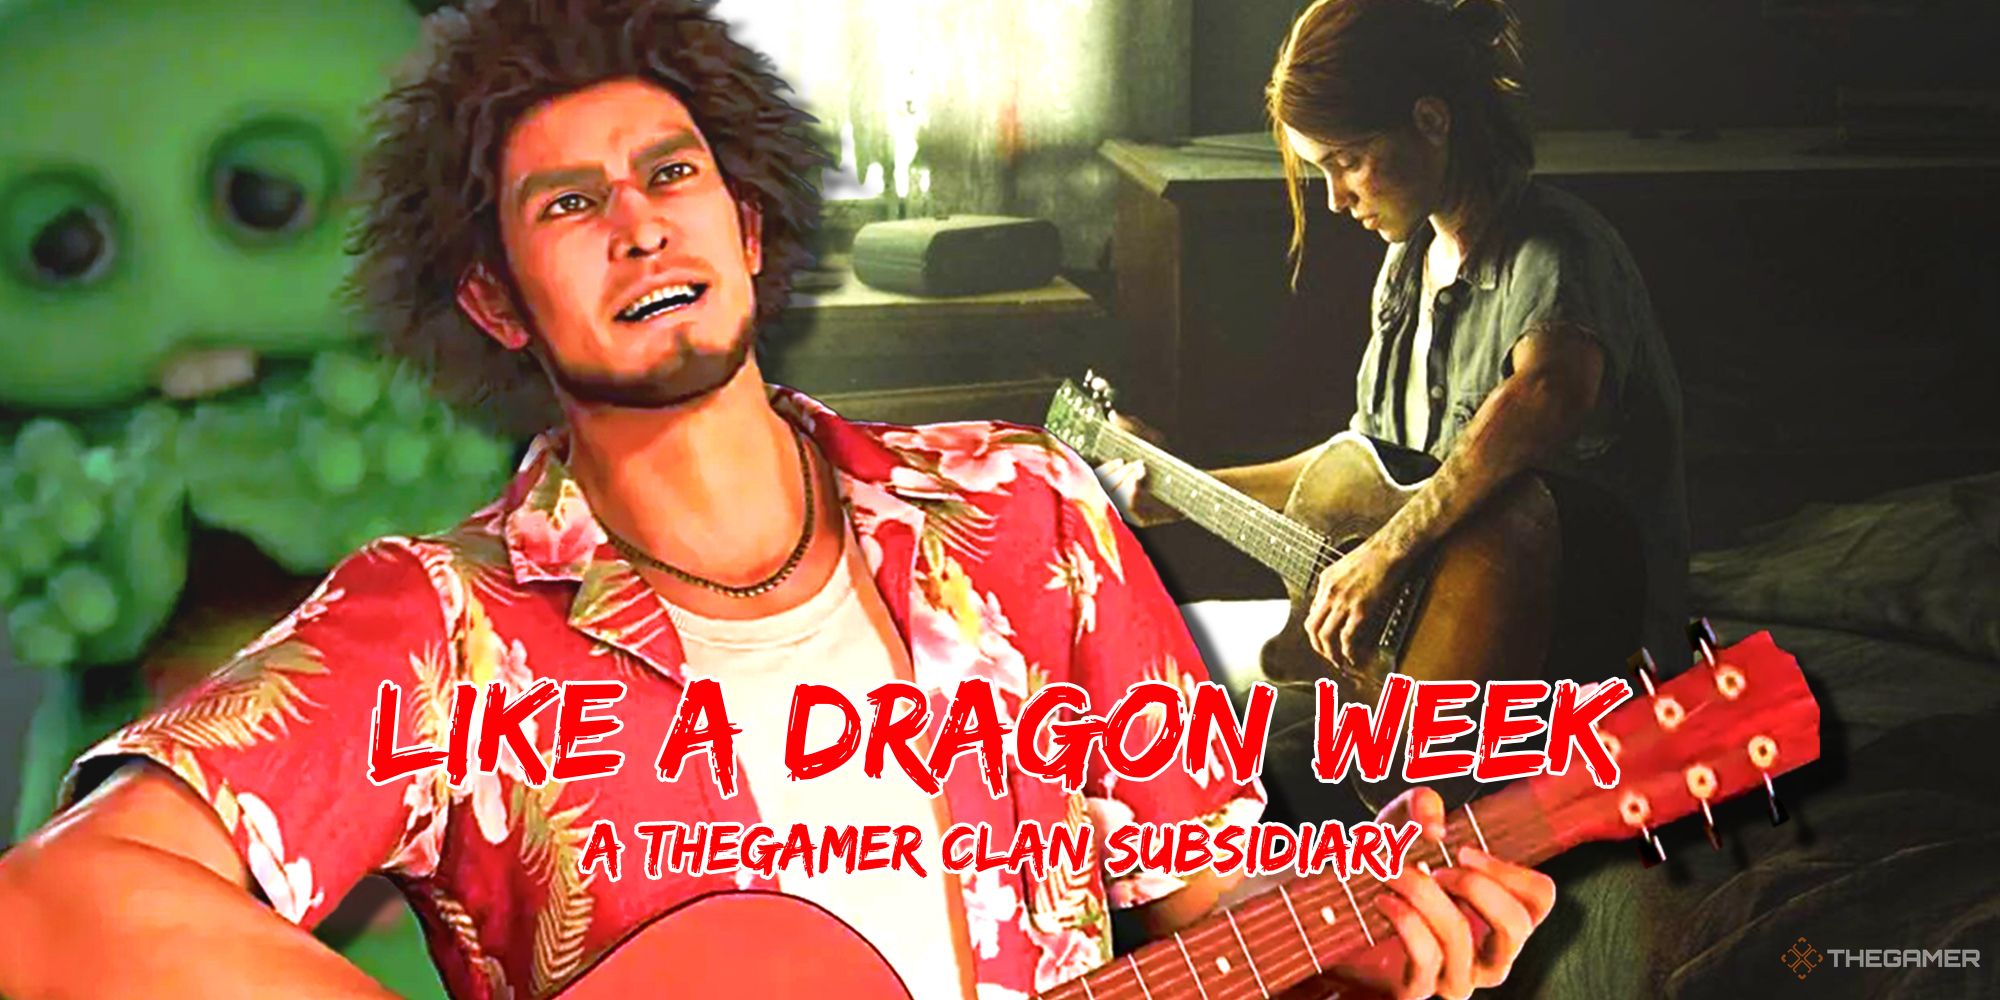 Ichiban from Yakuza Like A Dragon and Ellie from The Last of Us both playing guitar